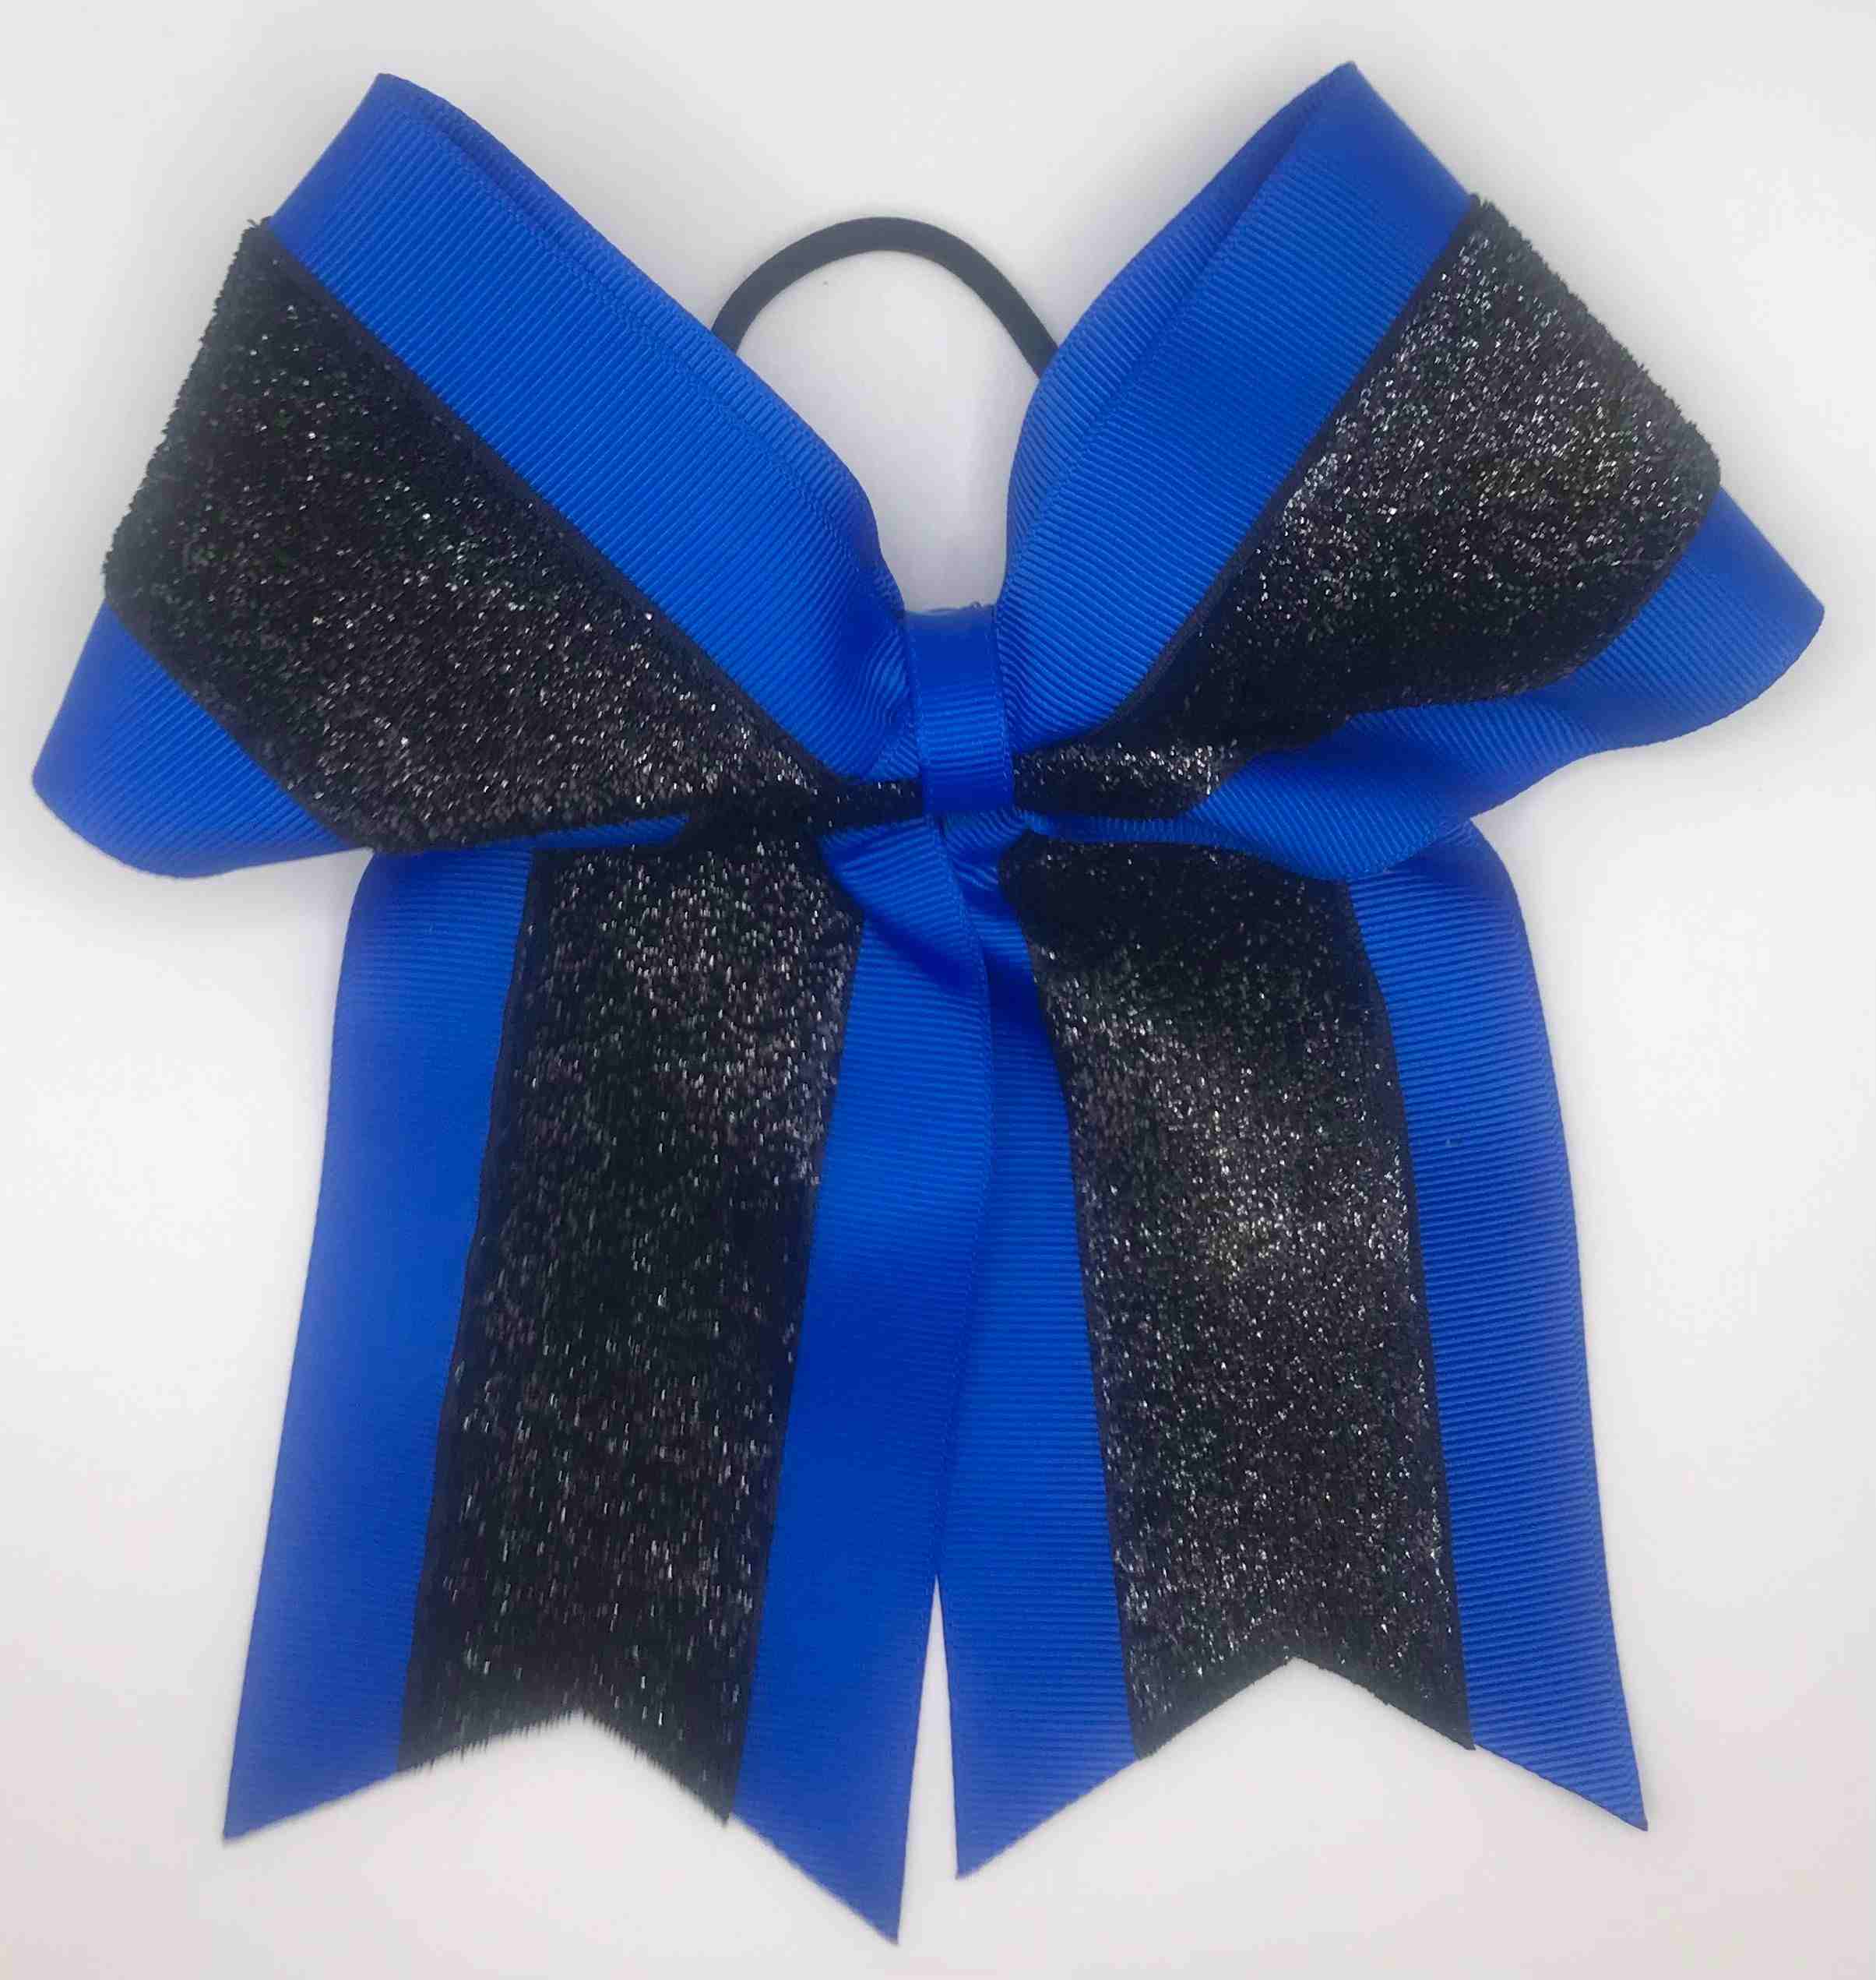 Royal Blue with Black Glitter Bow